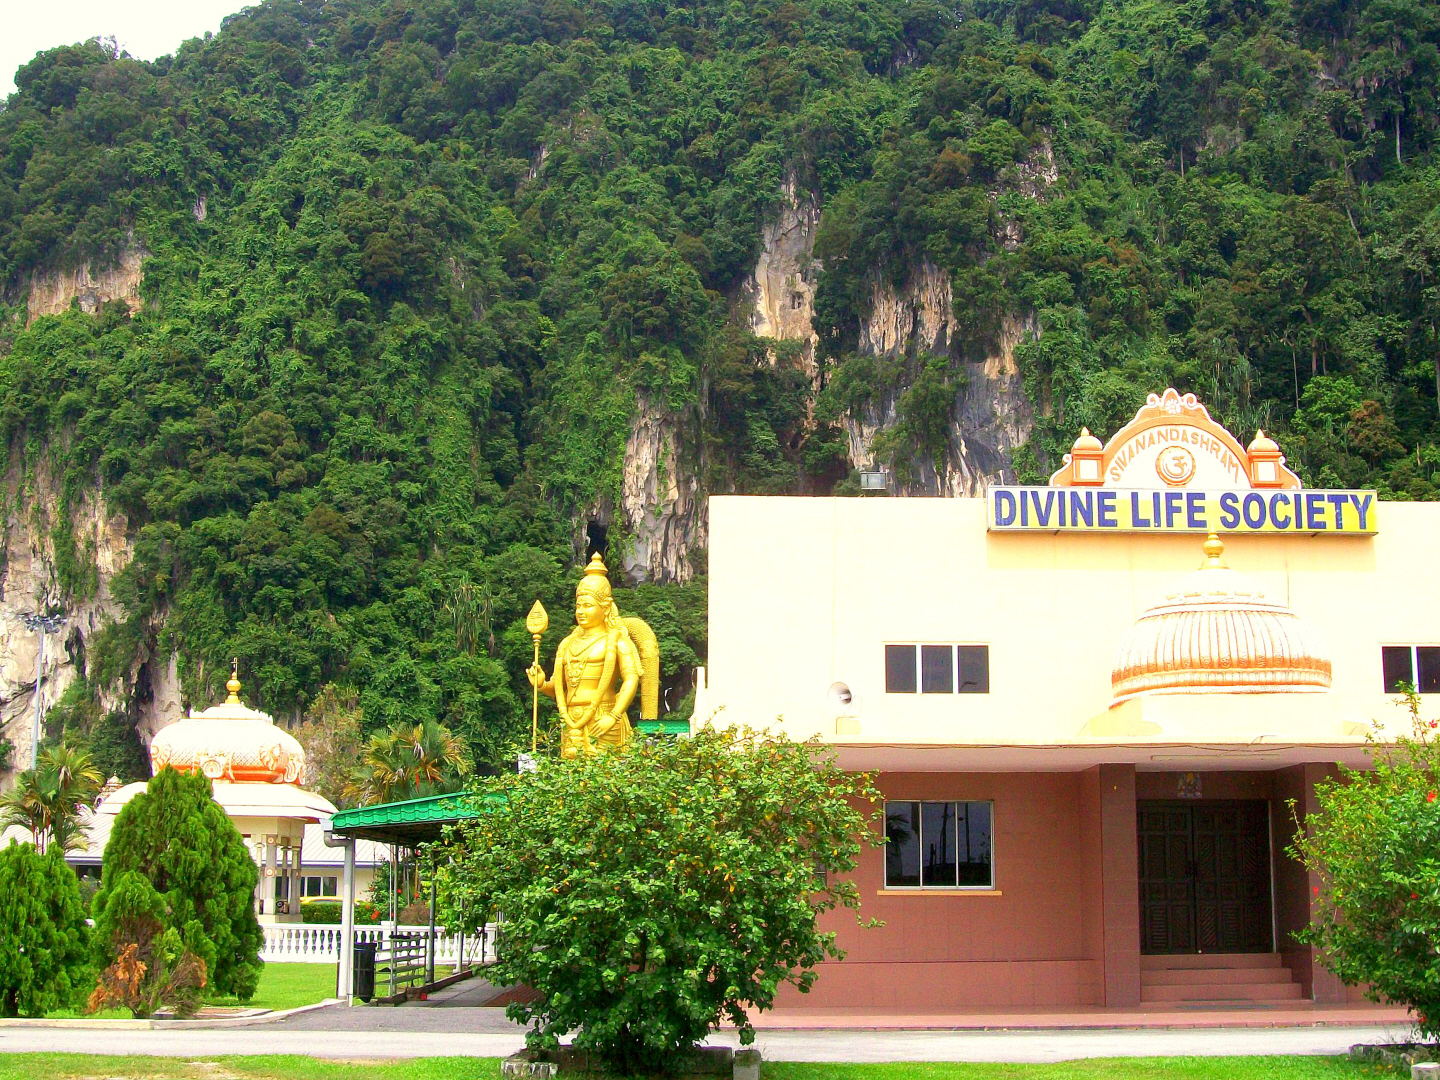 Swami Sivananda of the Divine Life Ashram - served as a Doctor in Malaysia,  as a Swami Advcated  Interfaith Programs